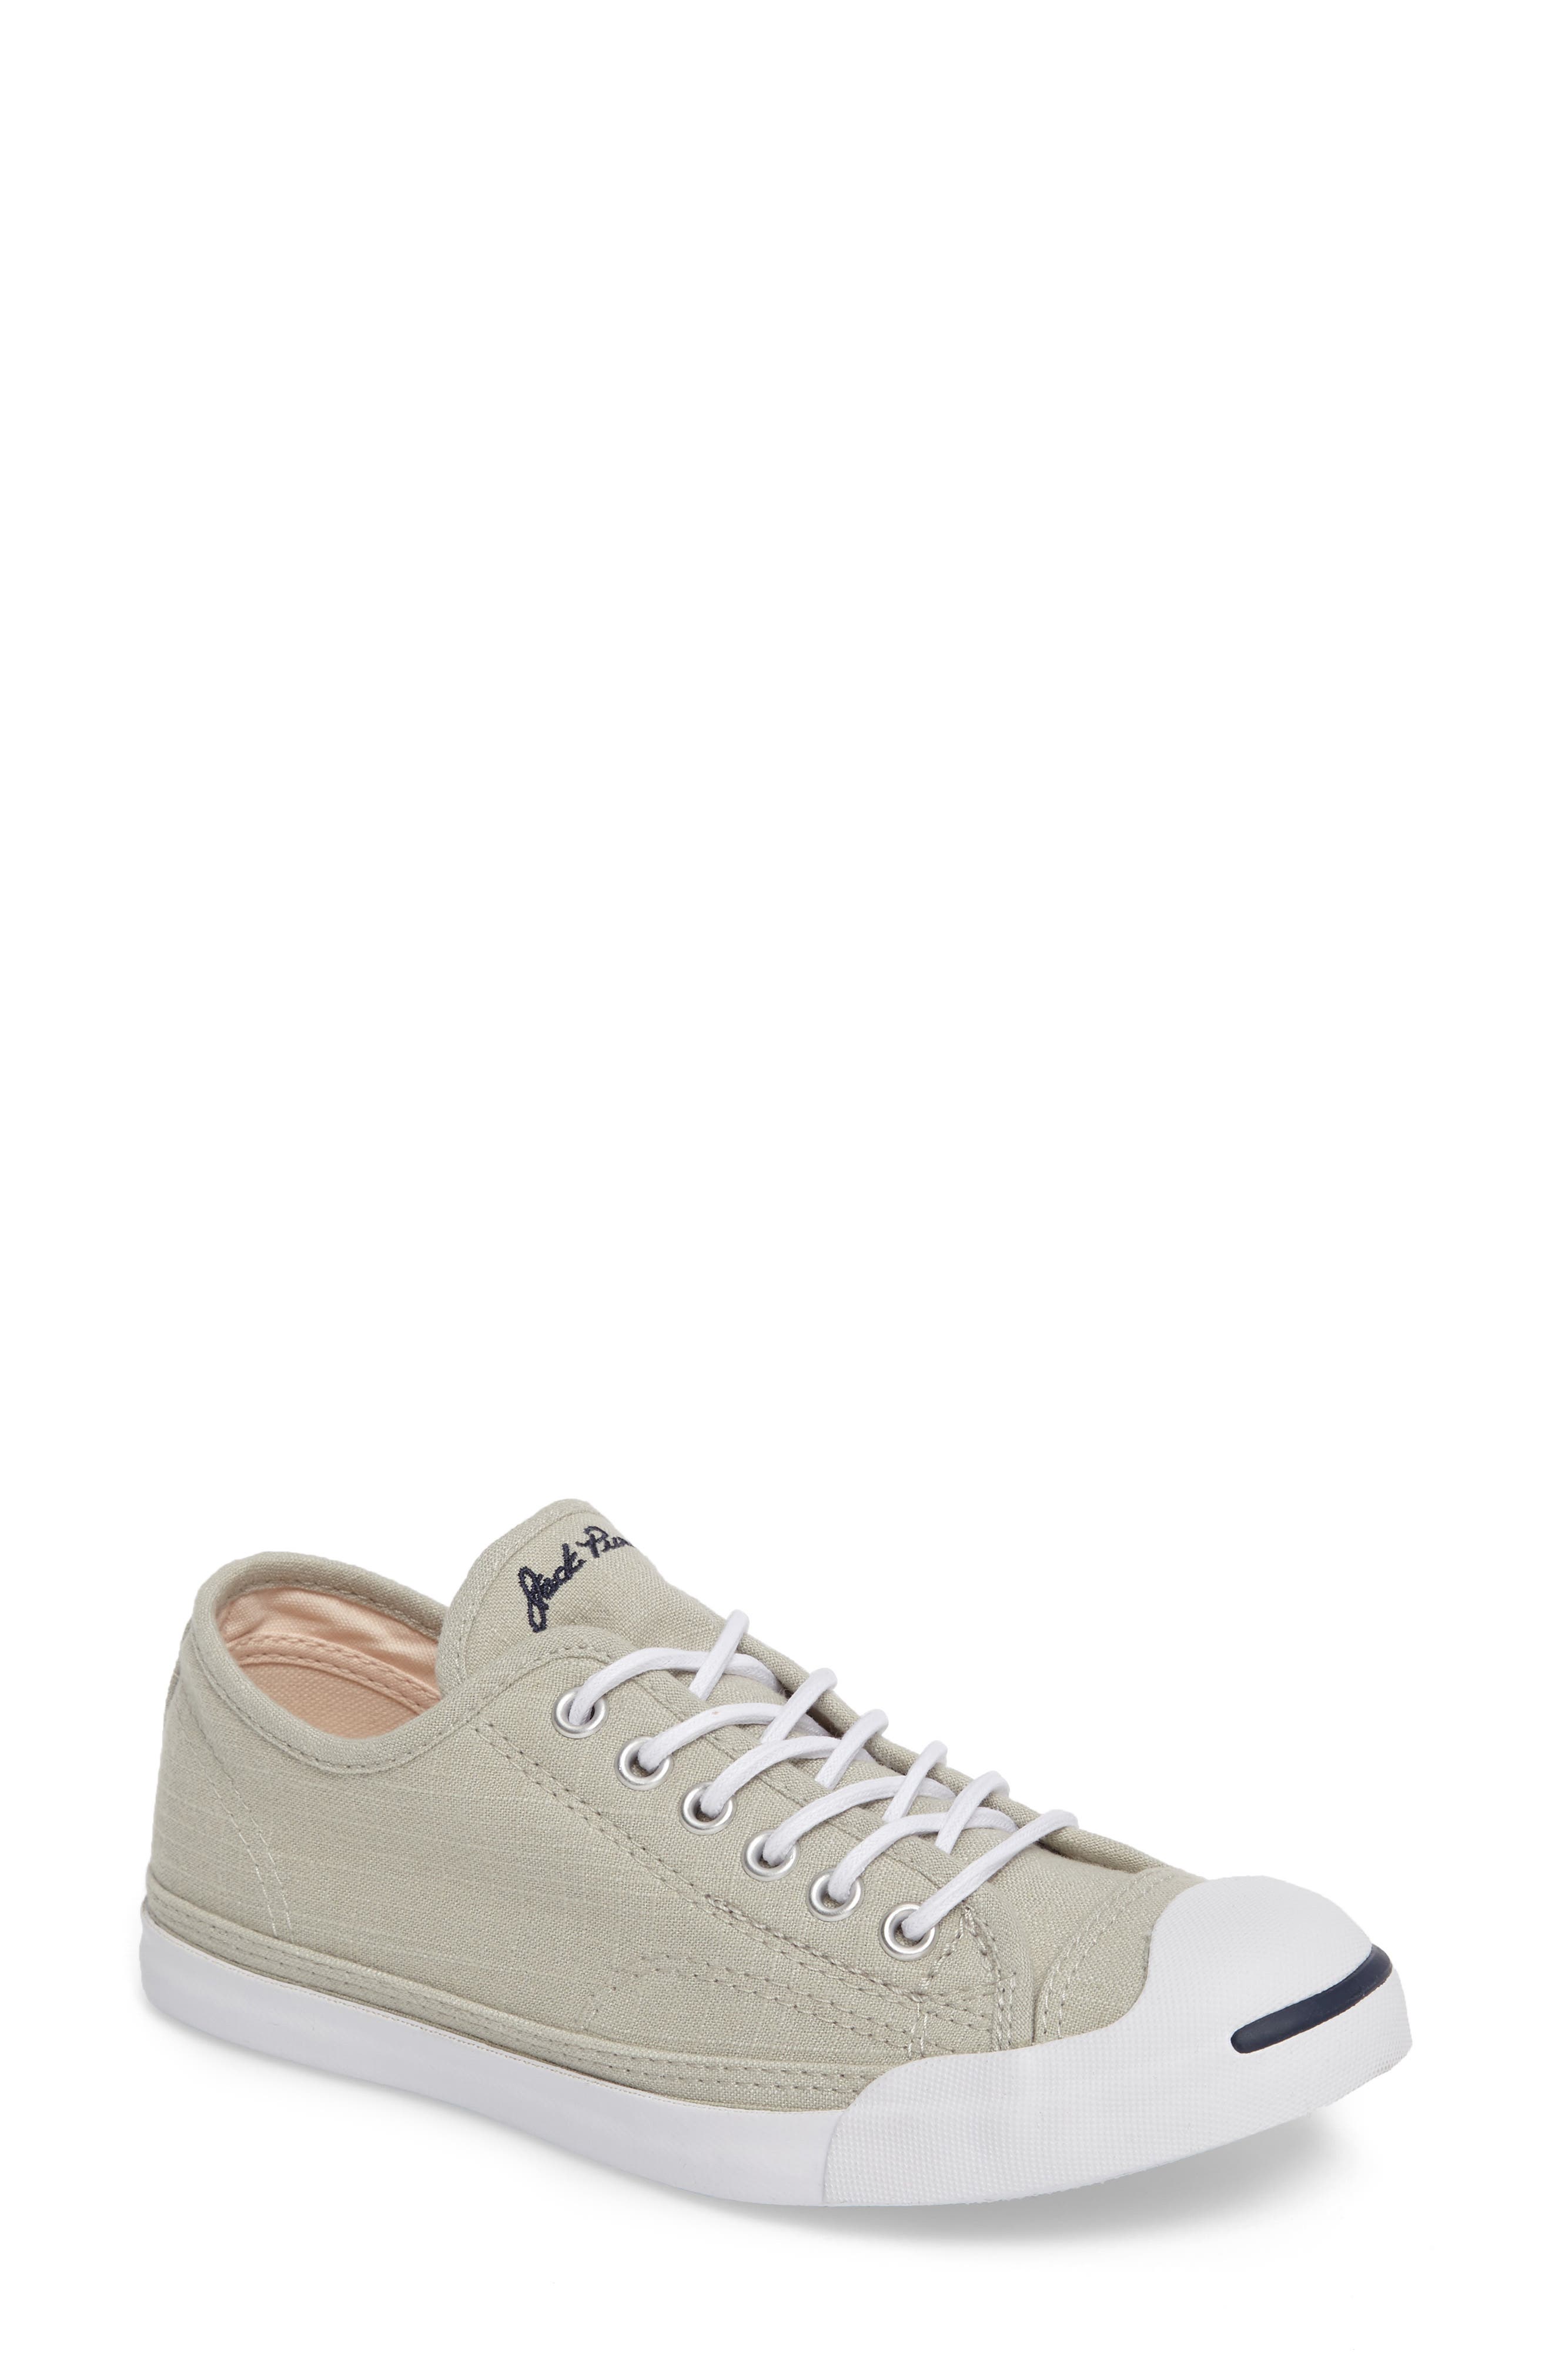 jack purcell chuck taylor